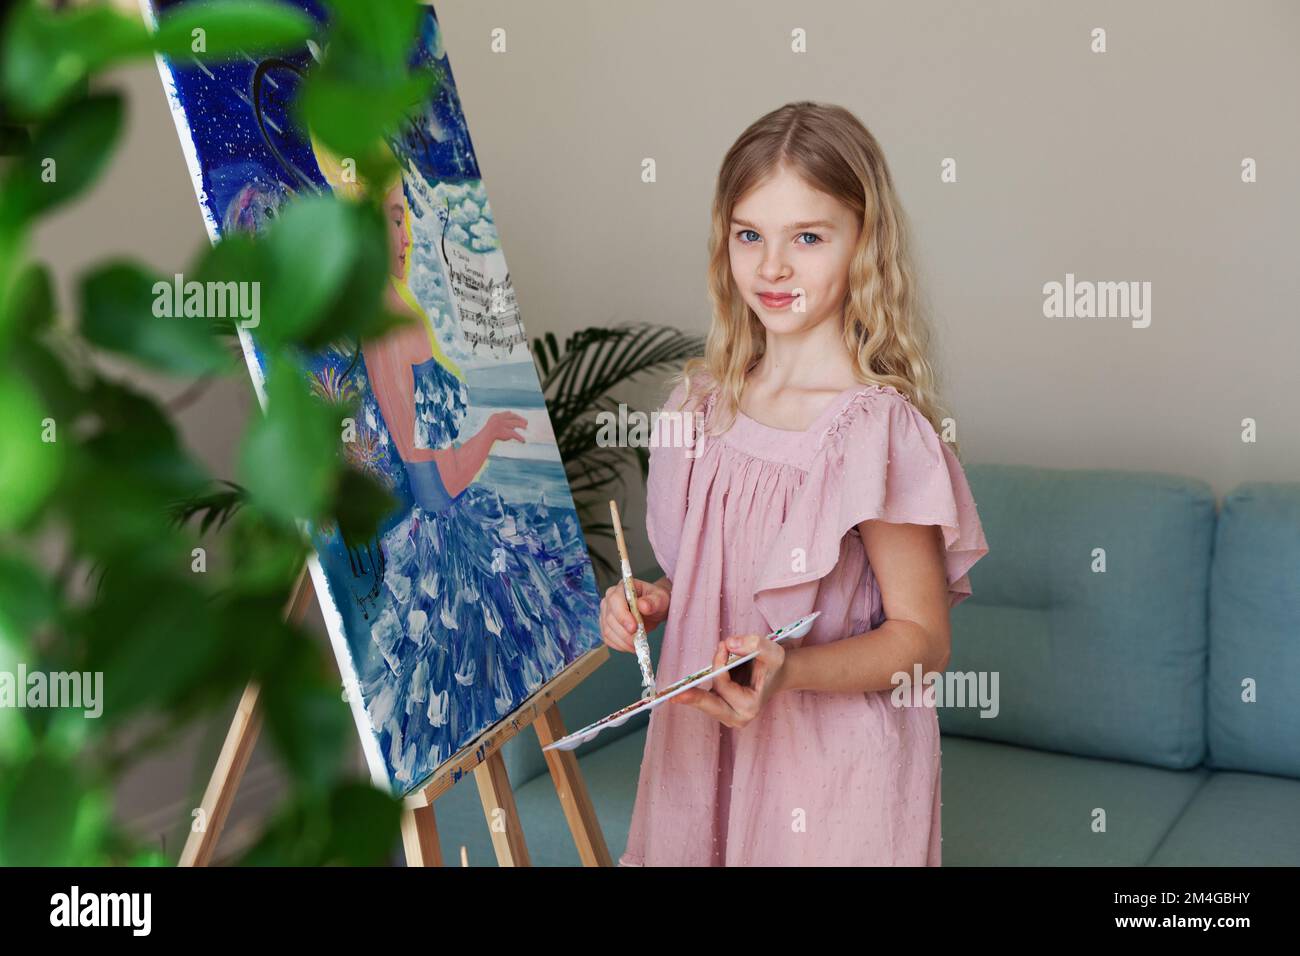 Blonde child girl artist drawing blue painting at home, looking in camera, wearing pink dress Stock Photo